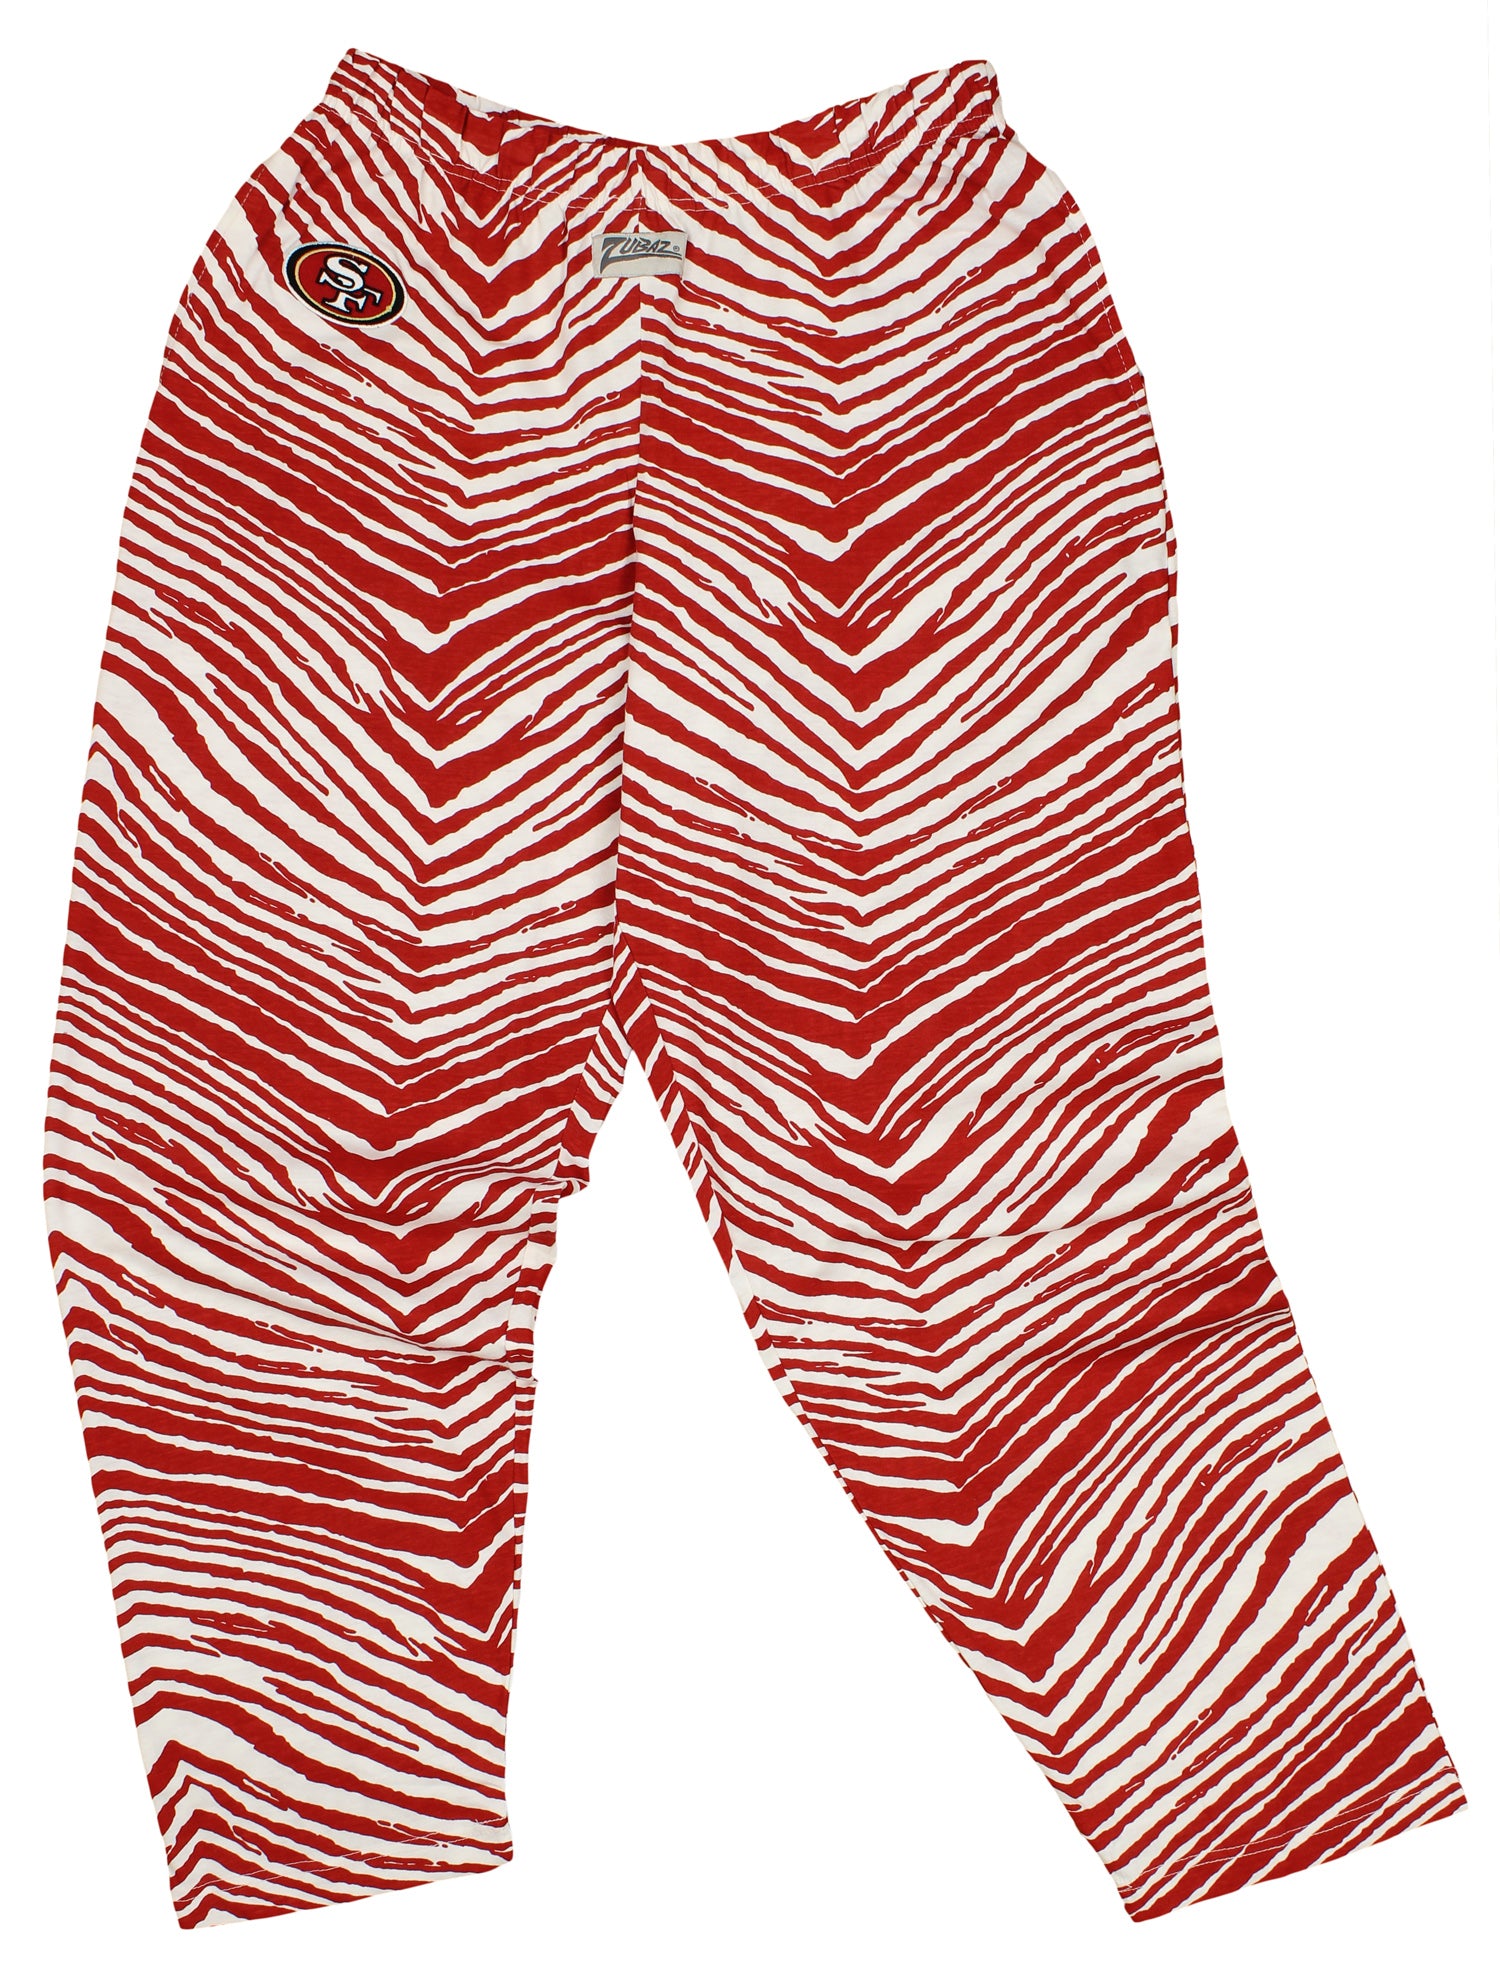 all products – Zubaz